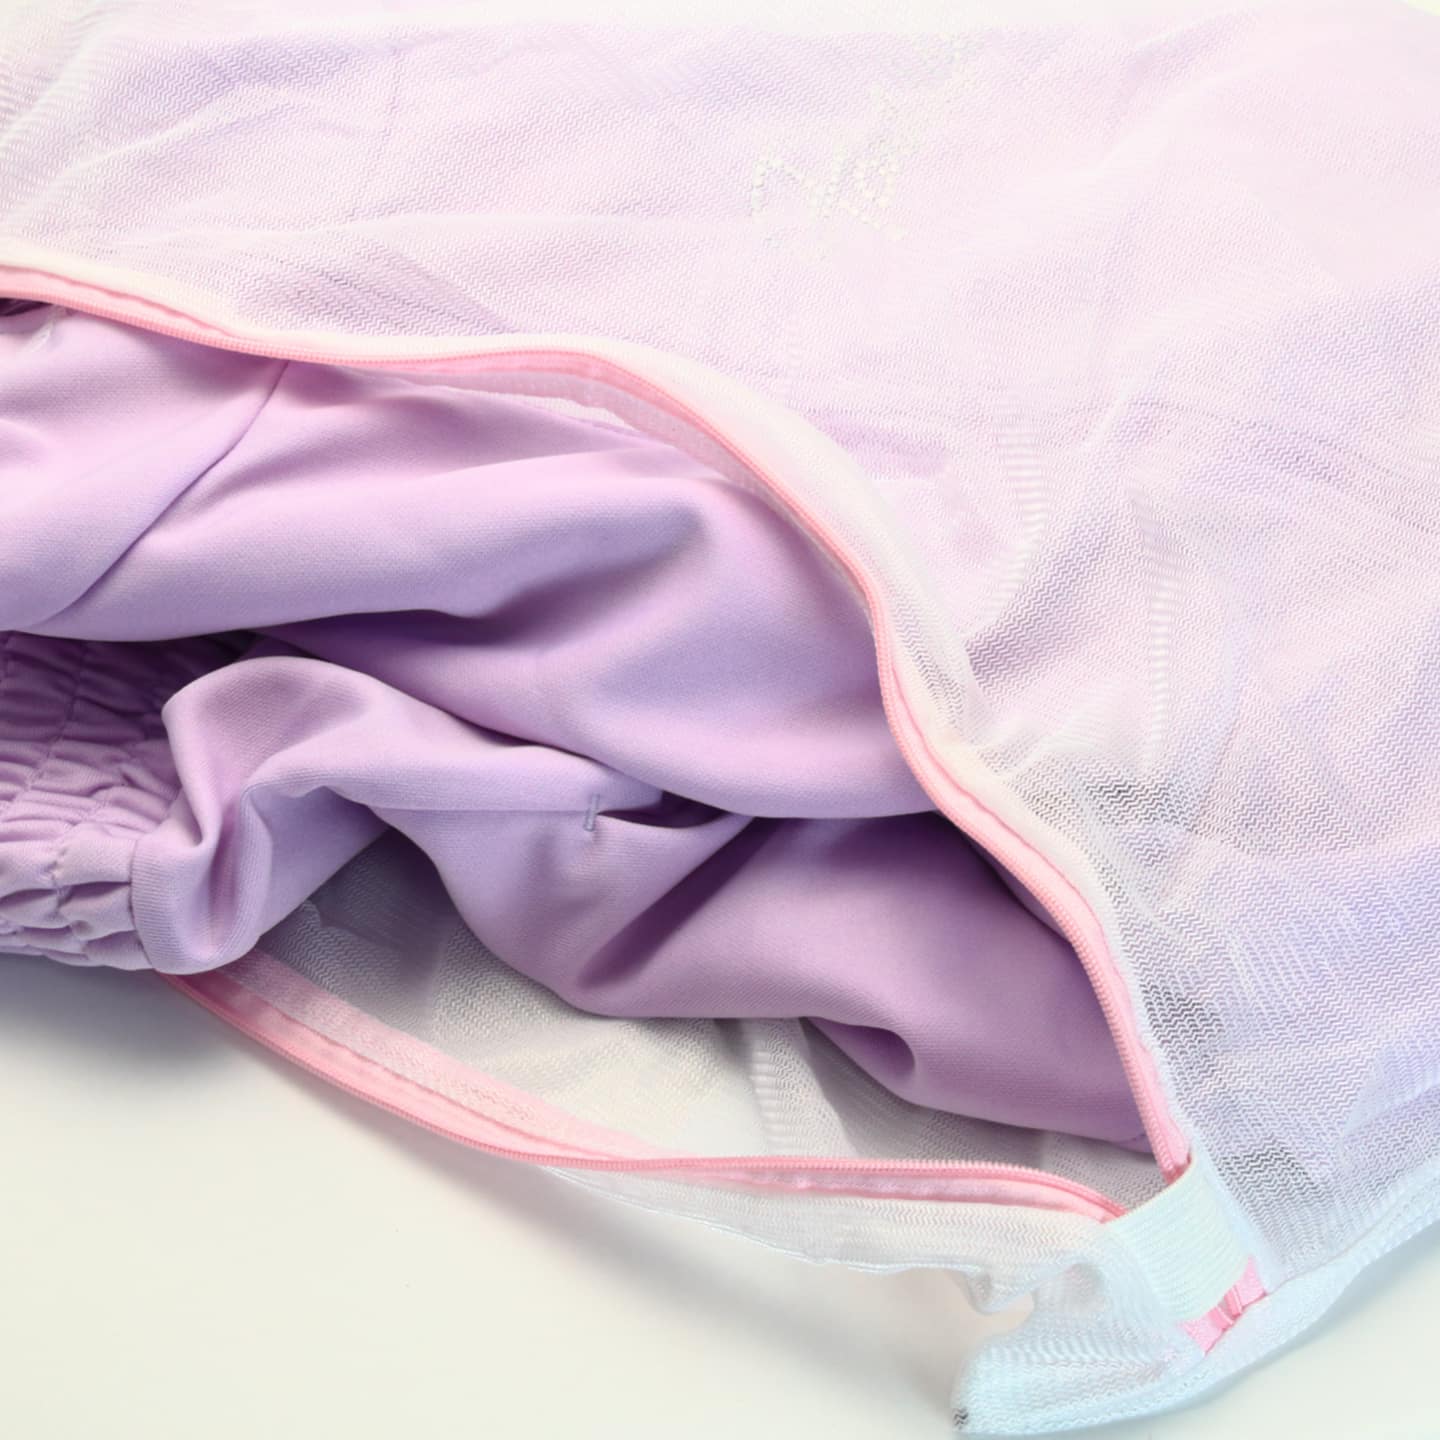 Pro-tip for delicate fabrics: laundry bags